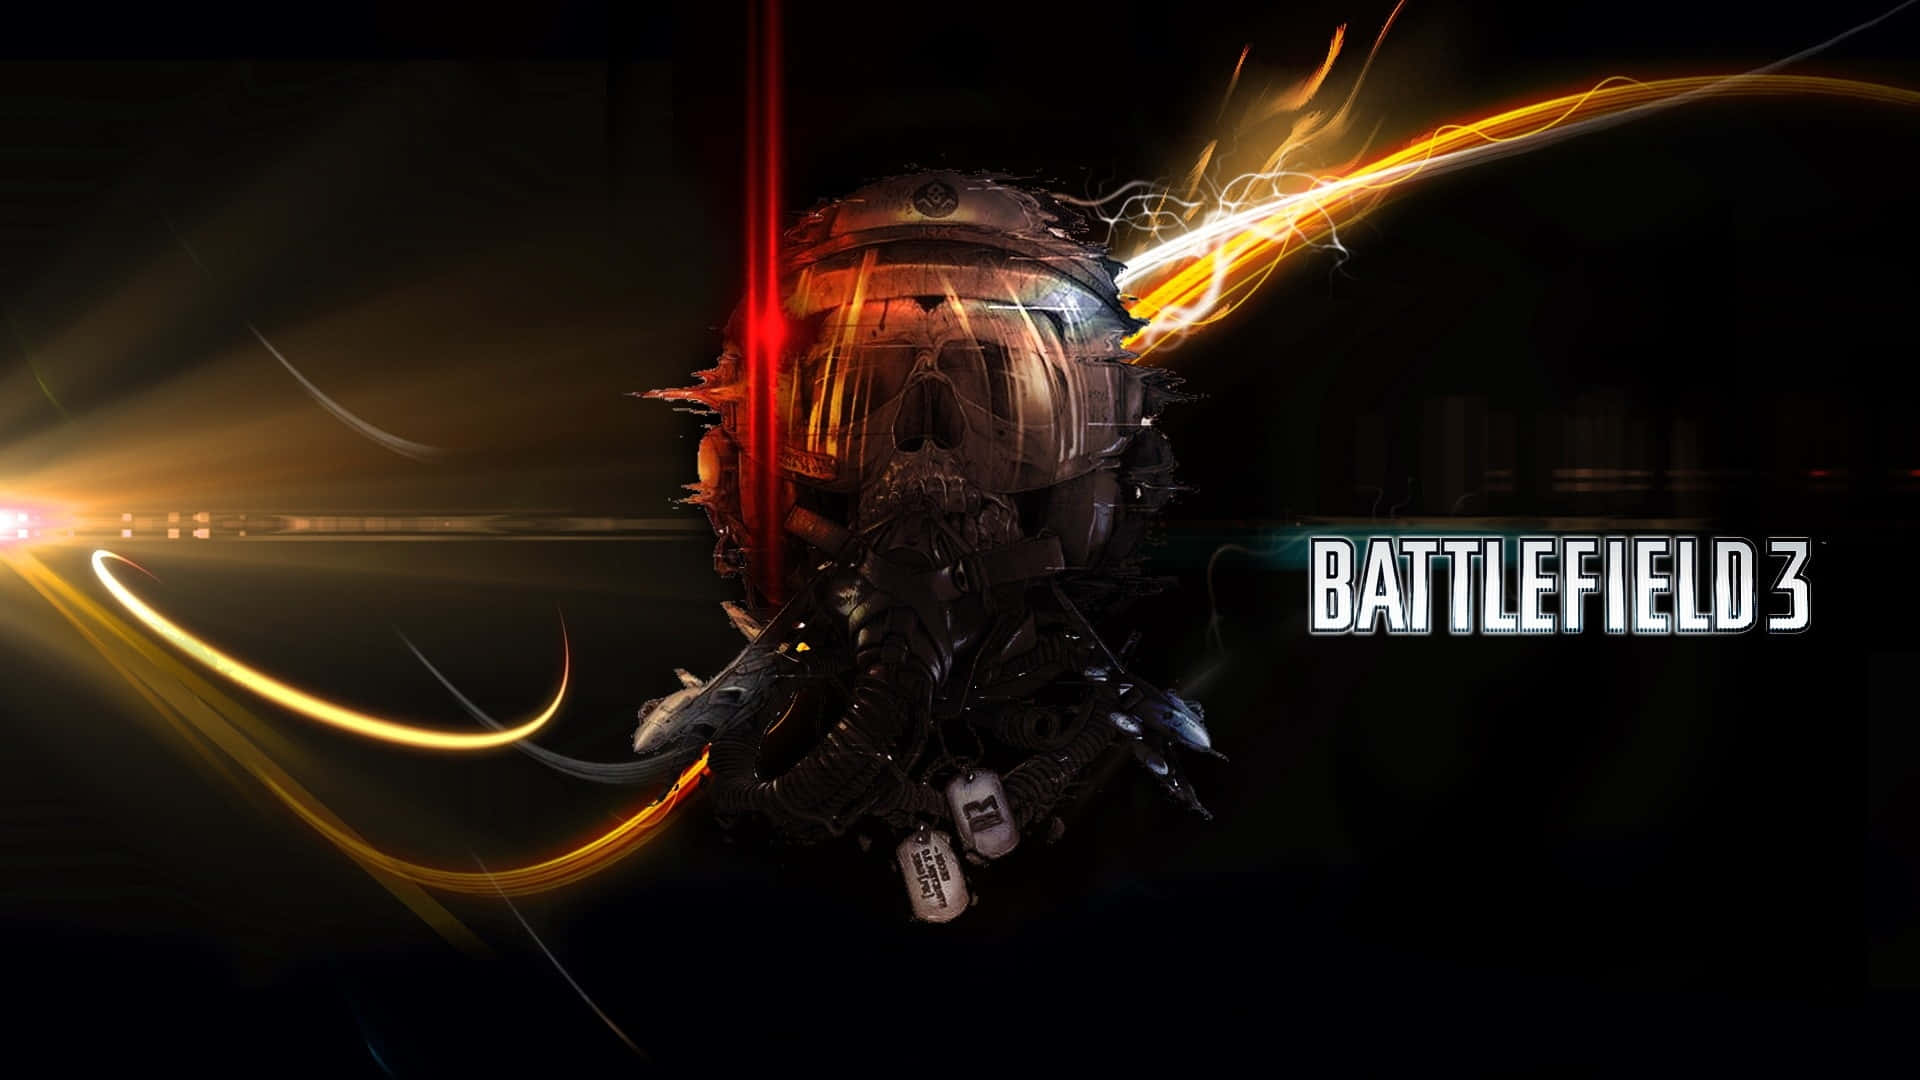 Game On! Ride into battle with Battlefield 3